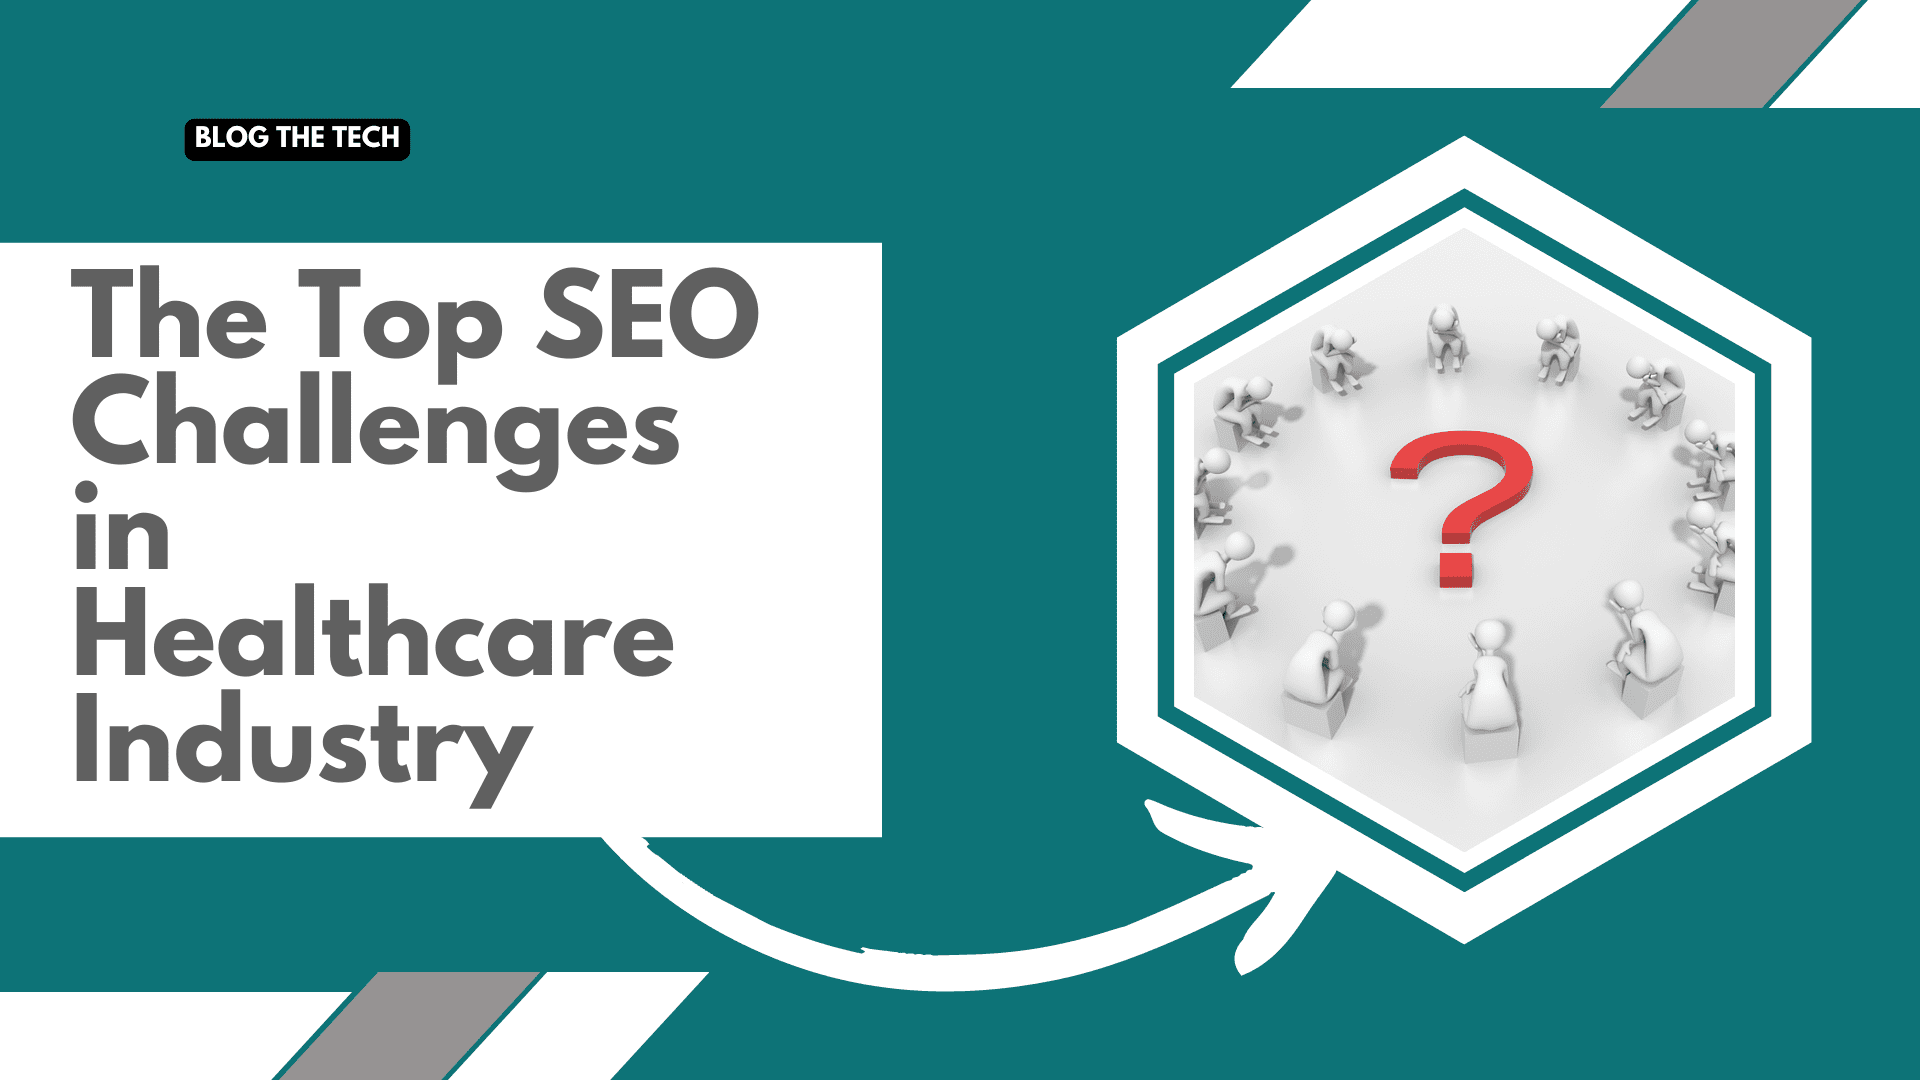 The Top SEO Challenges in Healthcare Industry